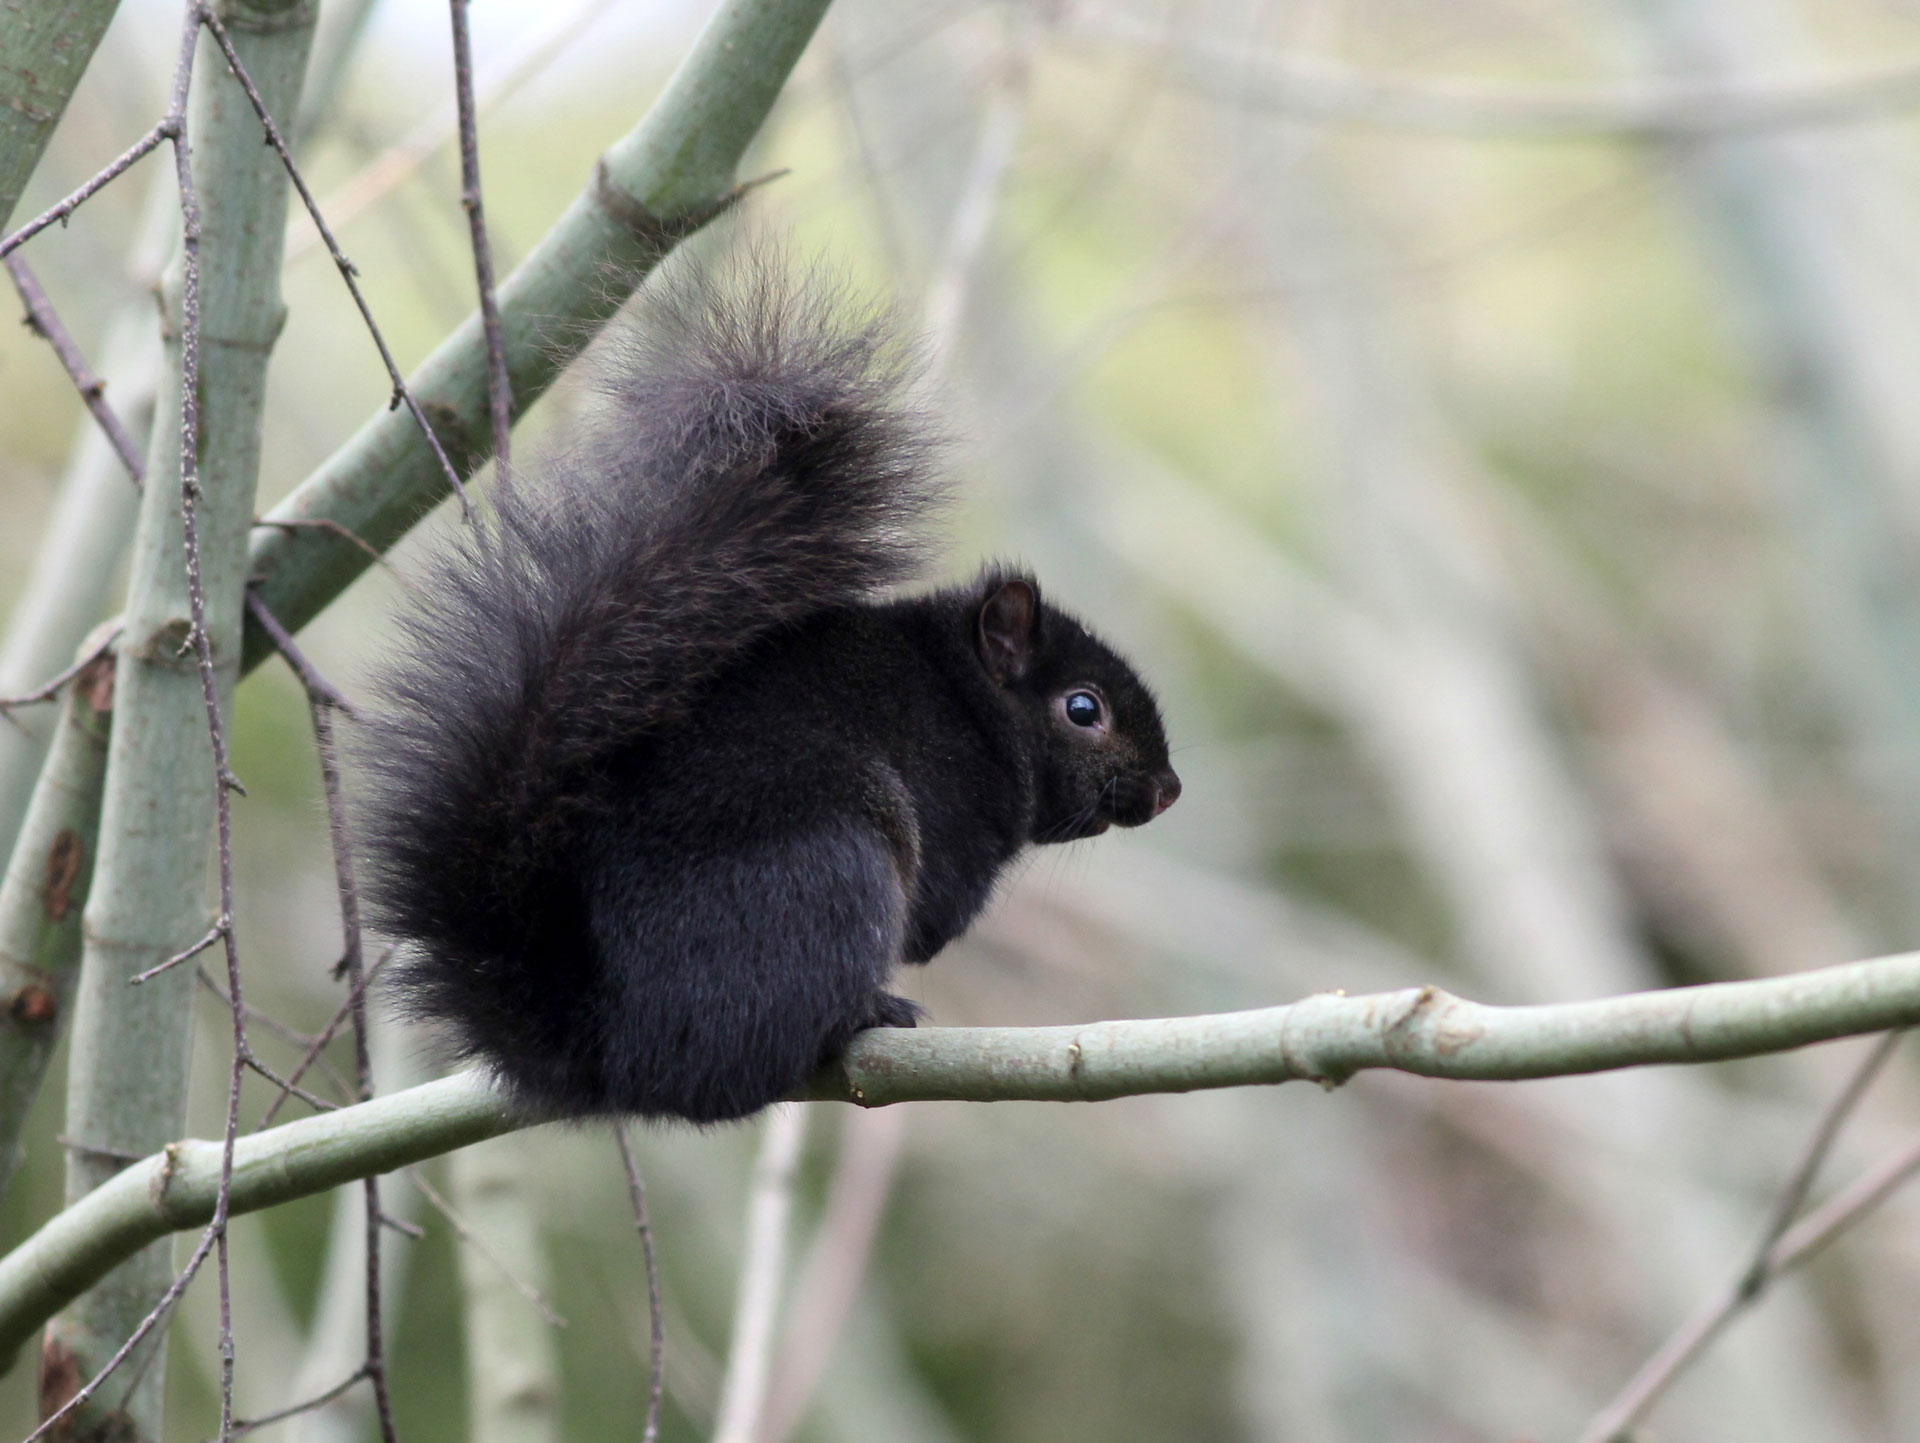 A squirrel with black coloring and a bushy tail sits on a think tree branch.